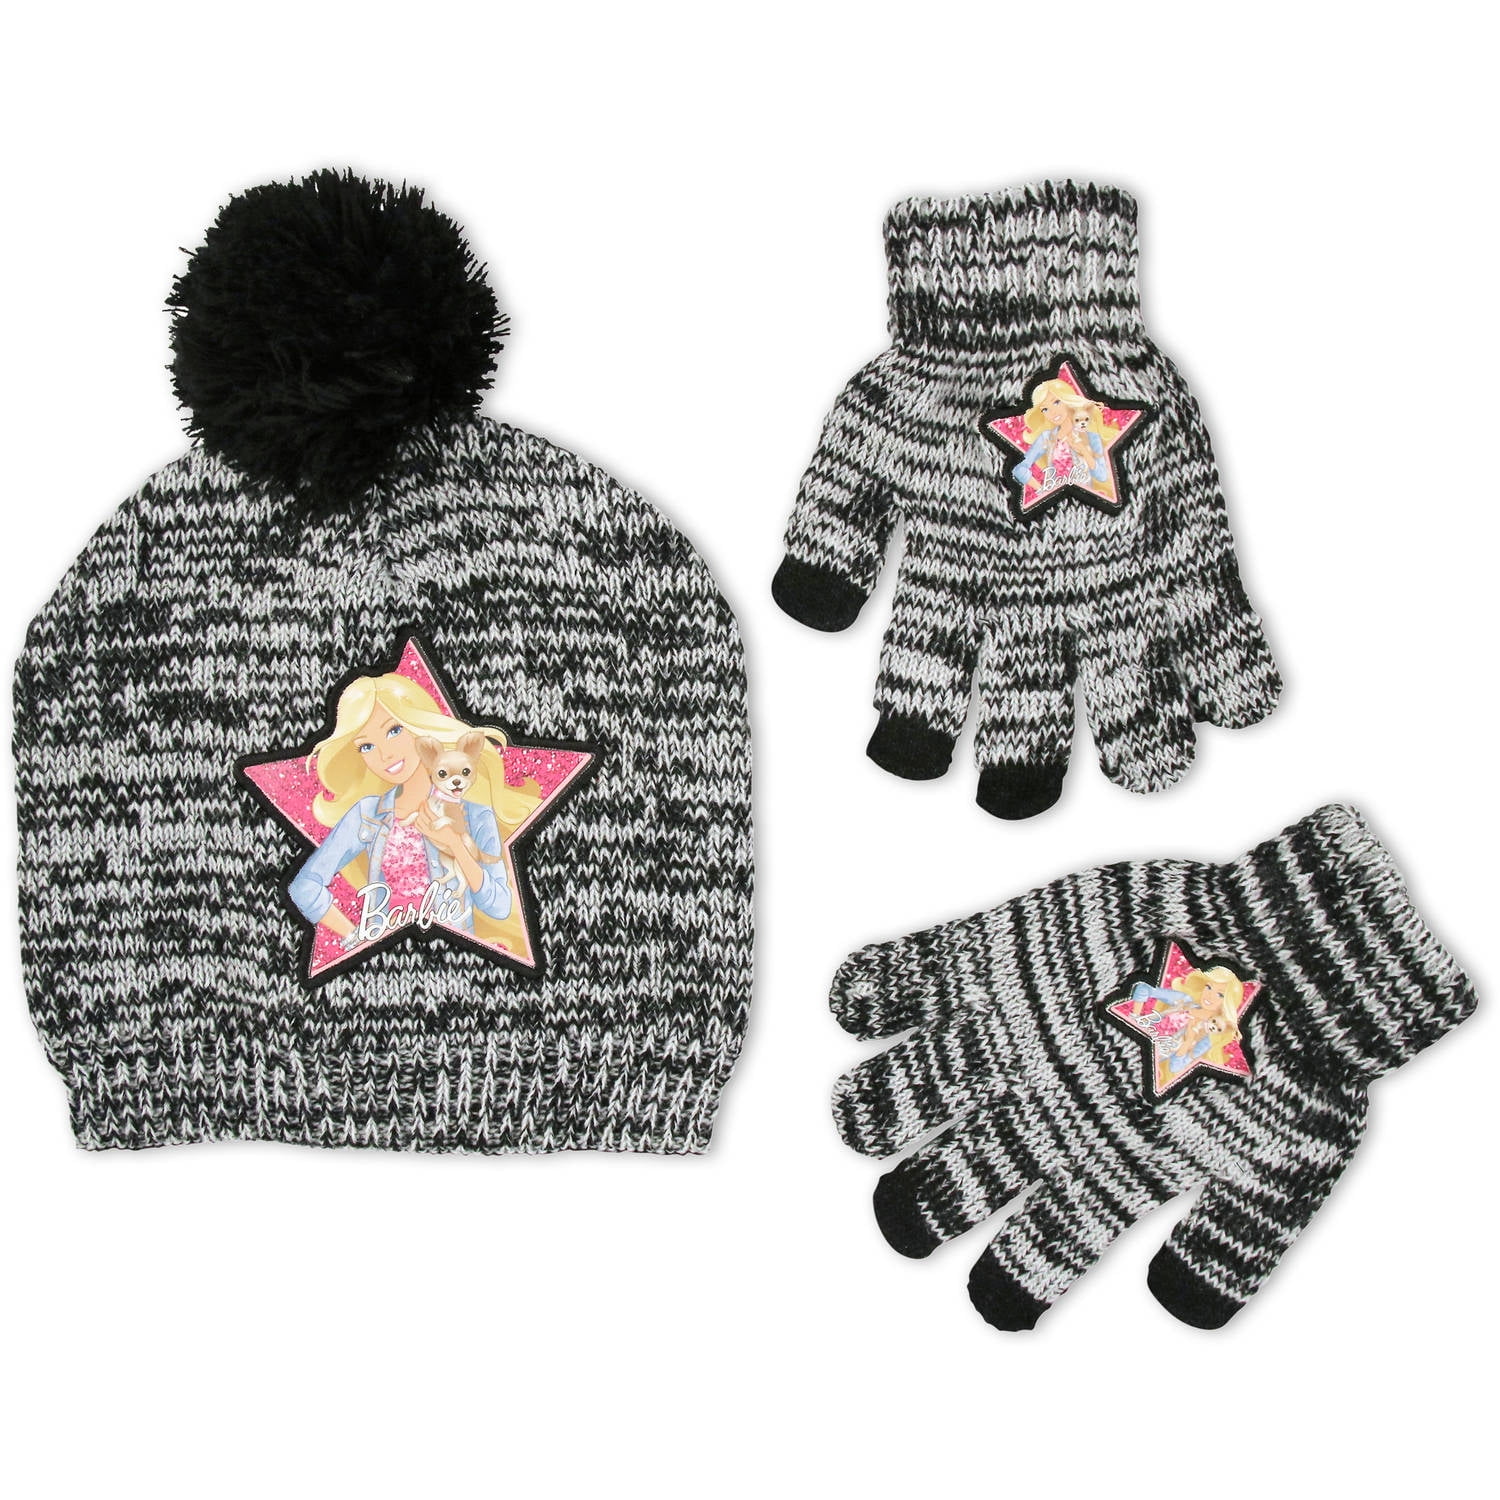 Barbie Girls Bobble Hat and Gloves Set Girl Gifts for Winter Original Barbie Accessories